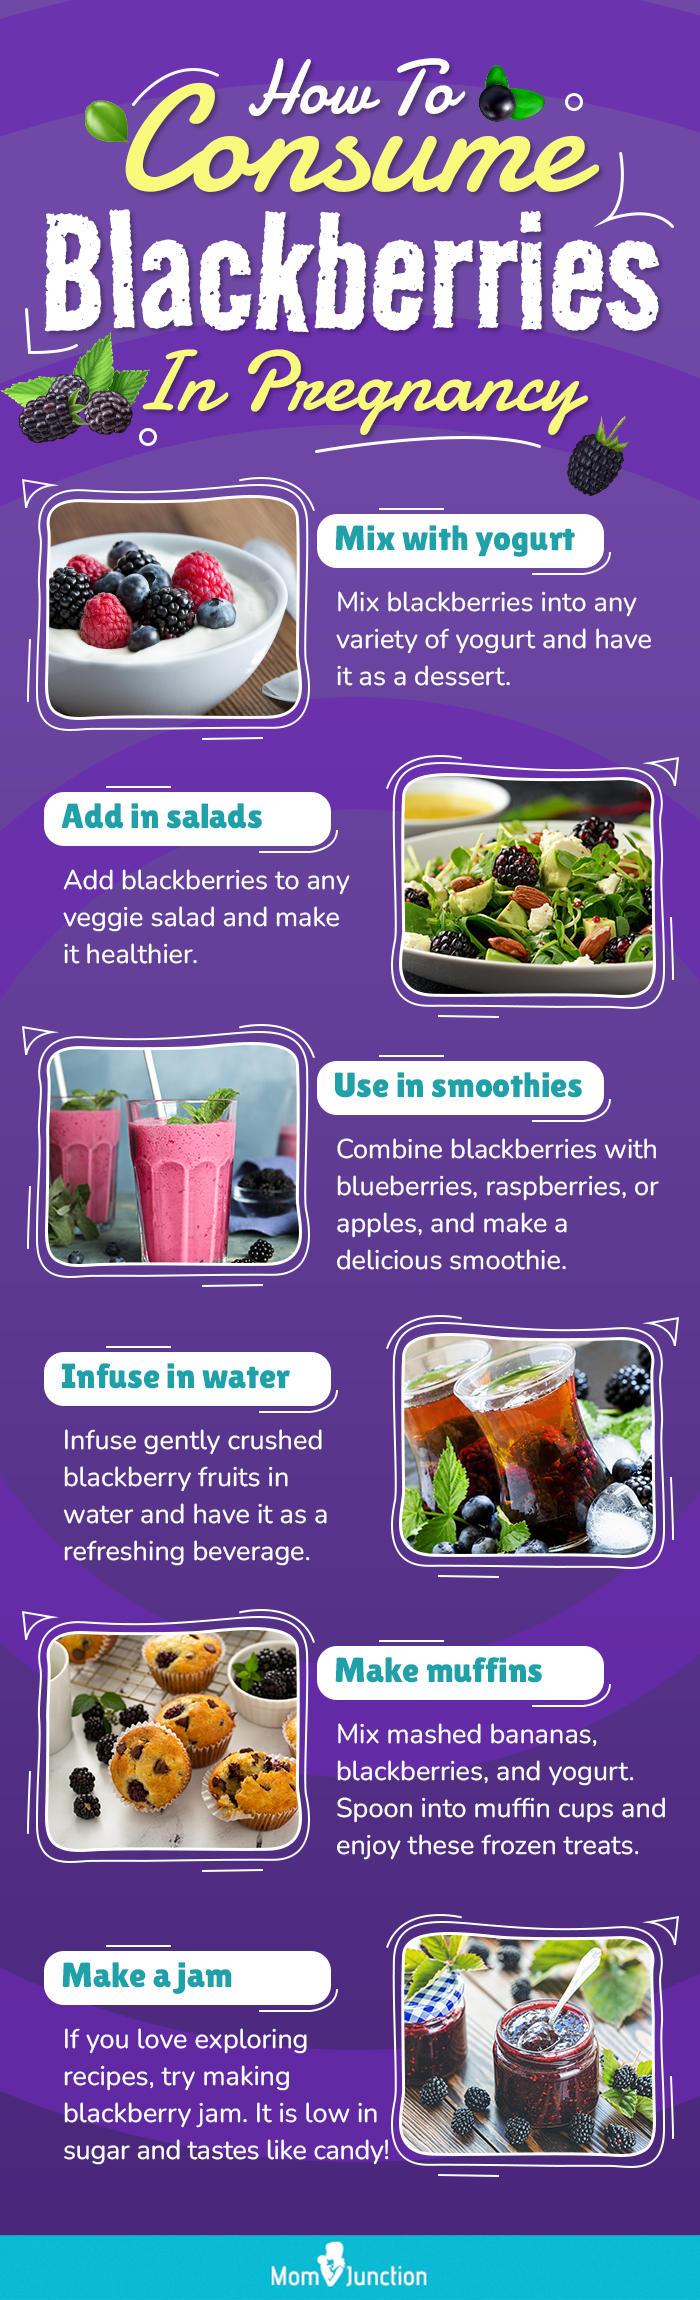 how to consume blackberries in pregnancy (infographic)